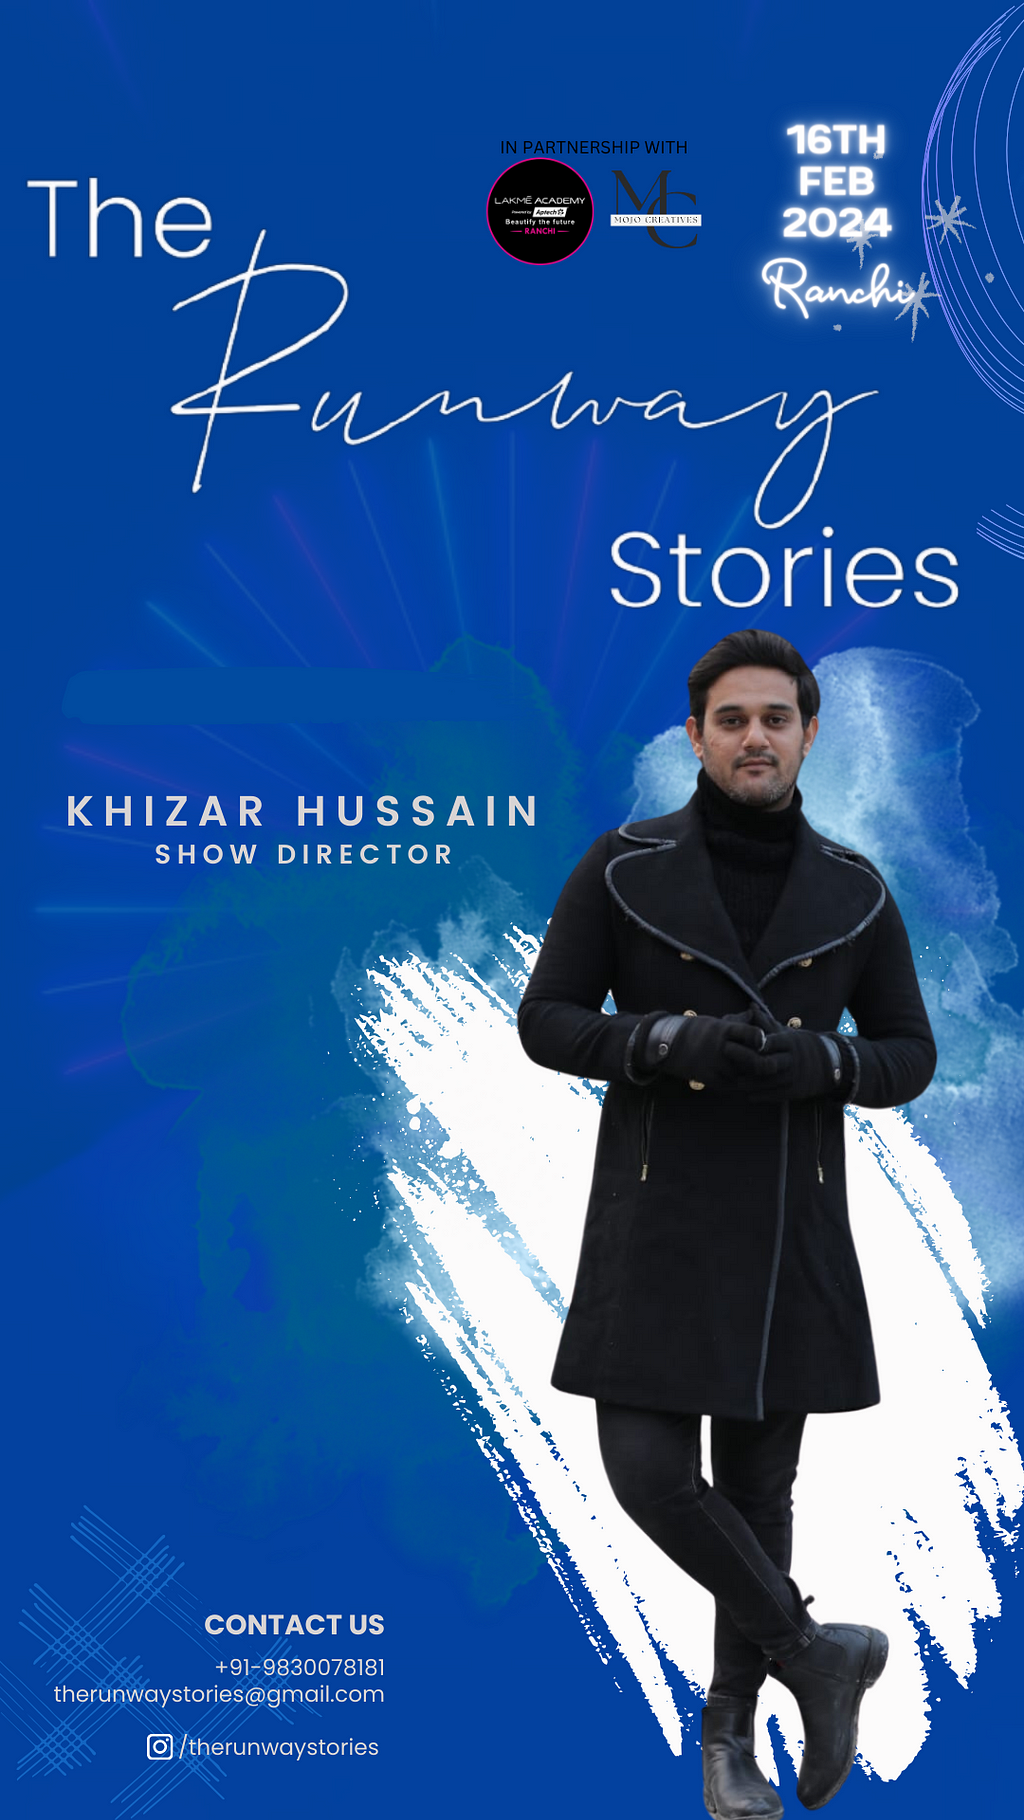 Show Director for the Runway Stories, Ranchi — Mr. Khizar Hussain will lead the models to showcase the designers outfits in the most uniquiely choreographed fashion show Ranchi has ever seen.